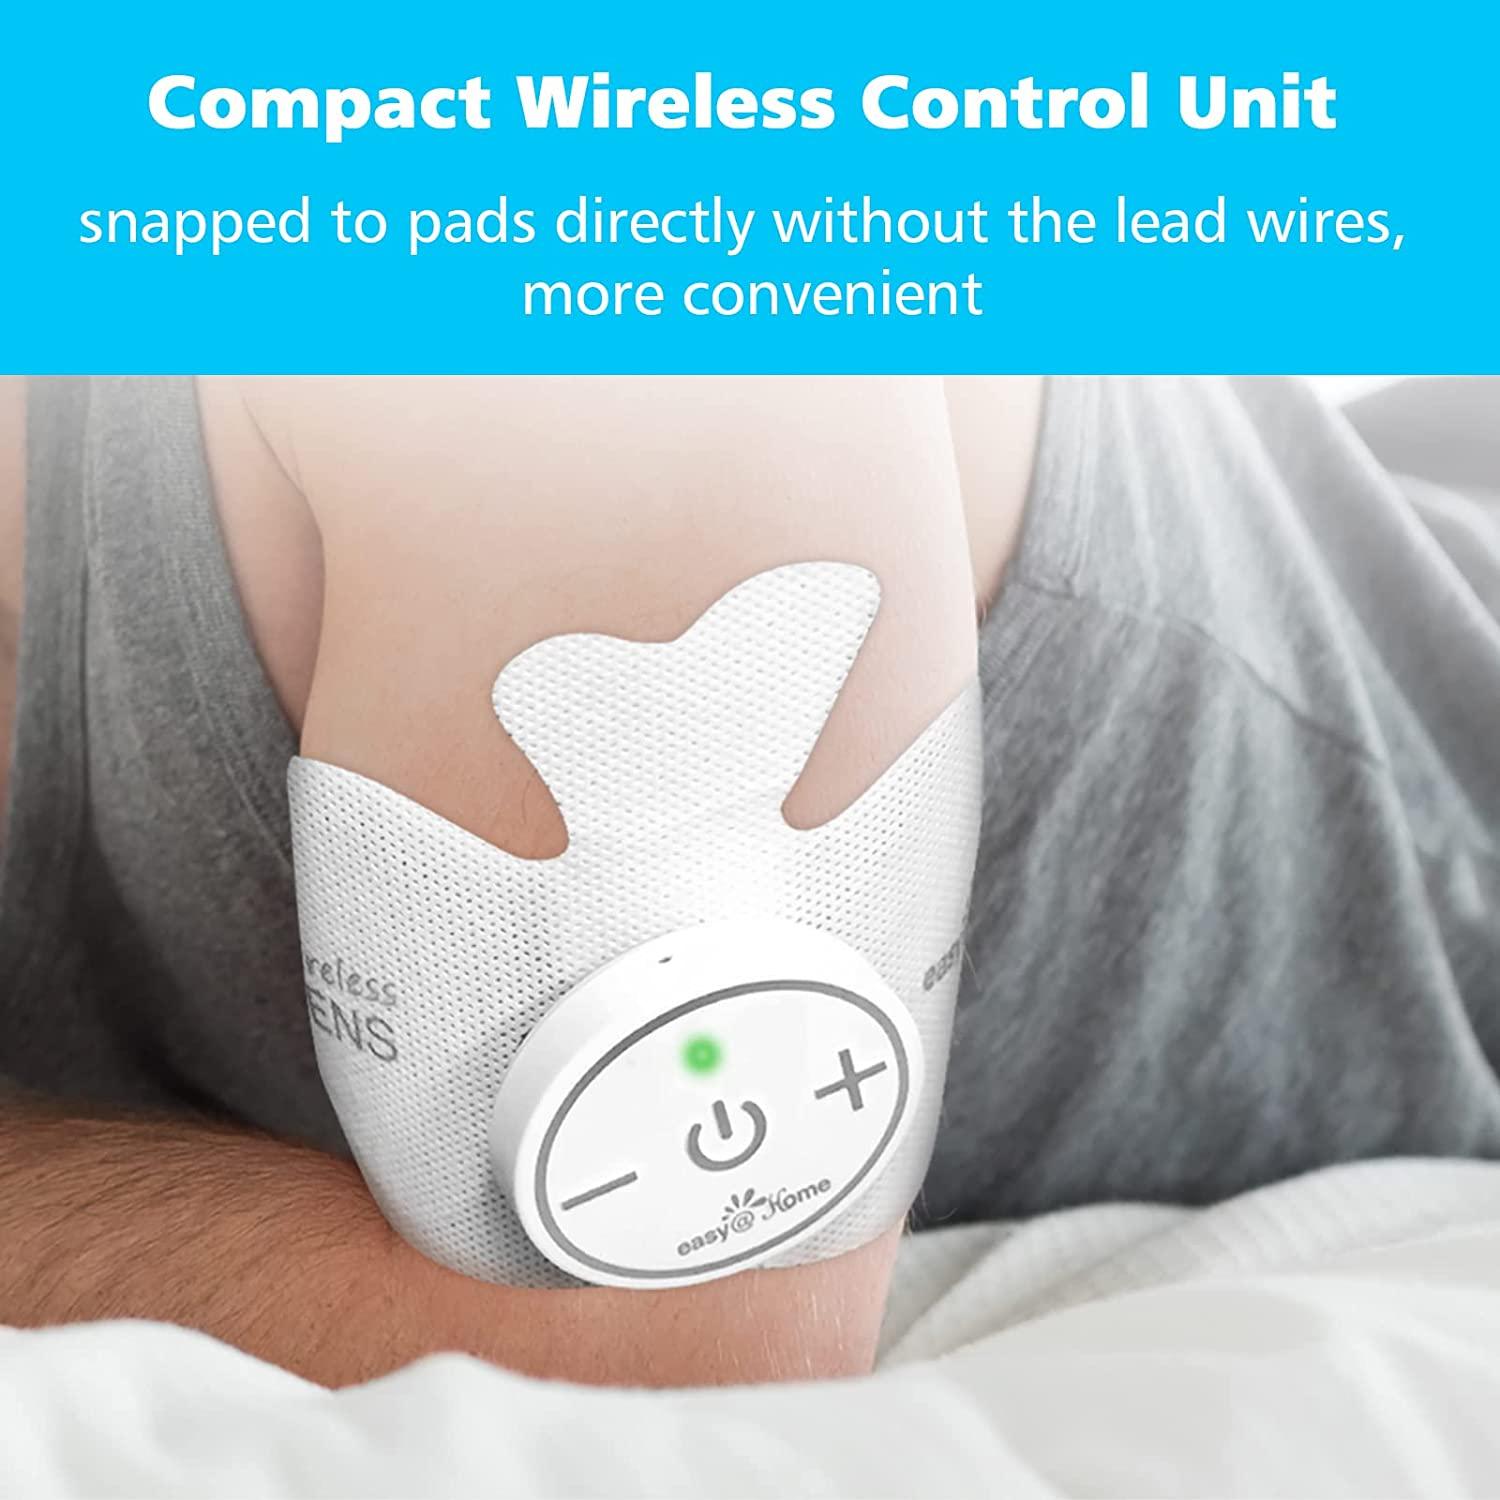 EasyHome Rechargeable Compact Wireless TENS Unit - 510K Cleared, FSA  Eligible Electric EMS Muscle Stimulator Pain Relief Therapy, Portable Pain  Management Device EHE015